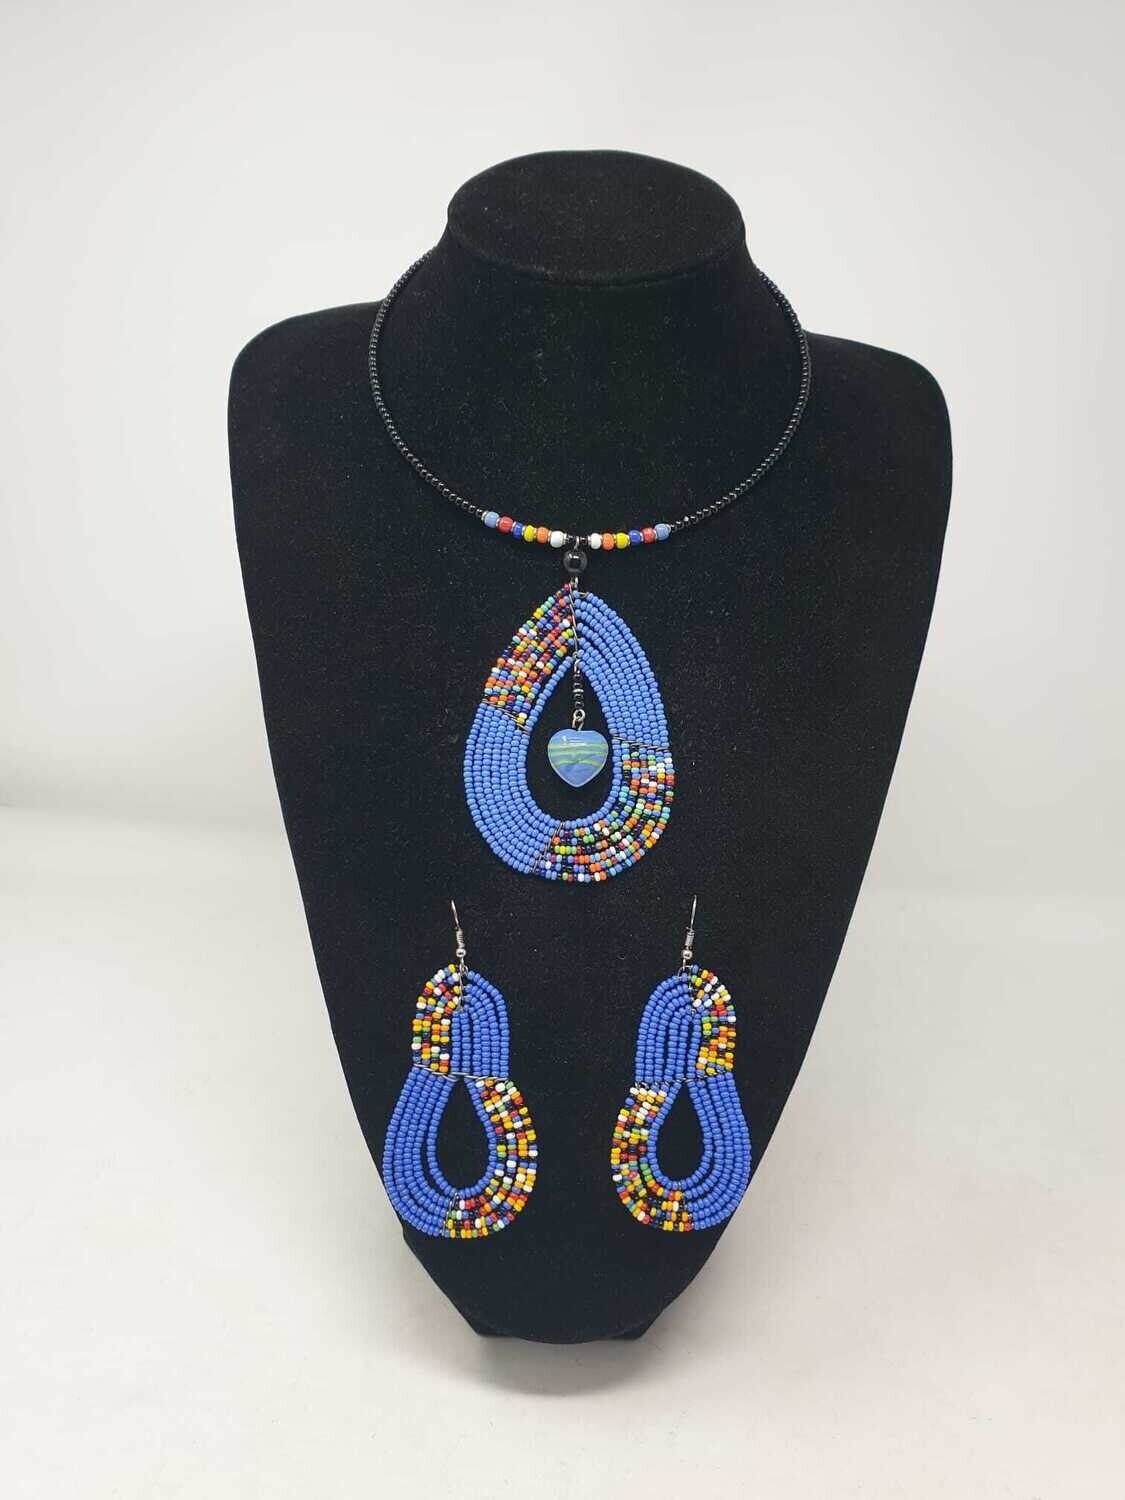 Unique Handbeaded Necklace with Matching Earrings